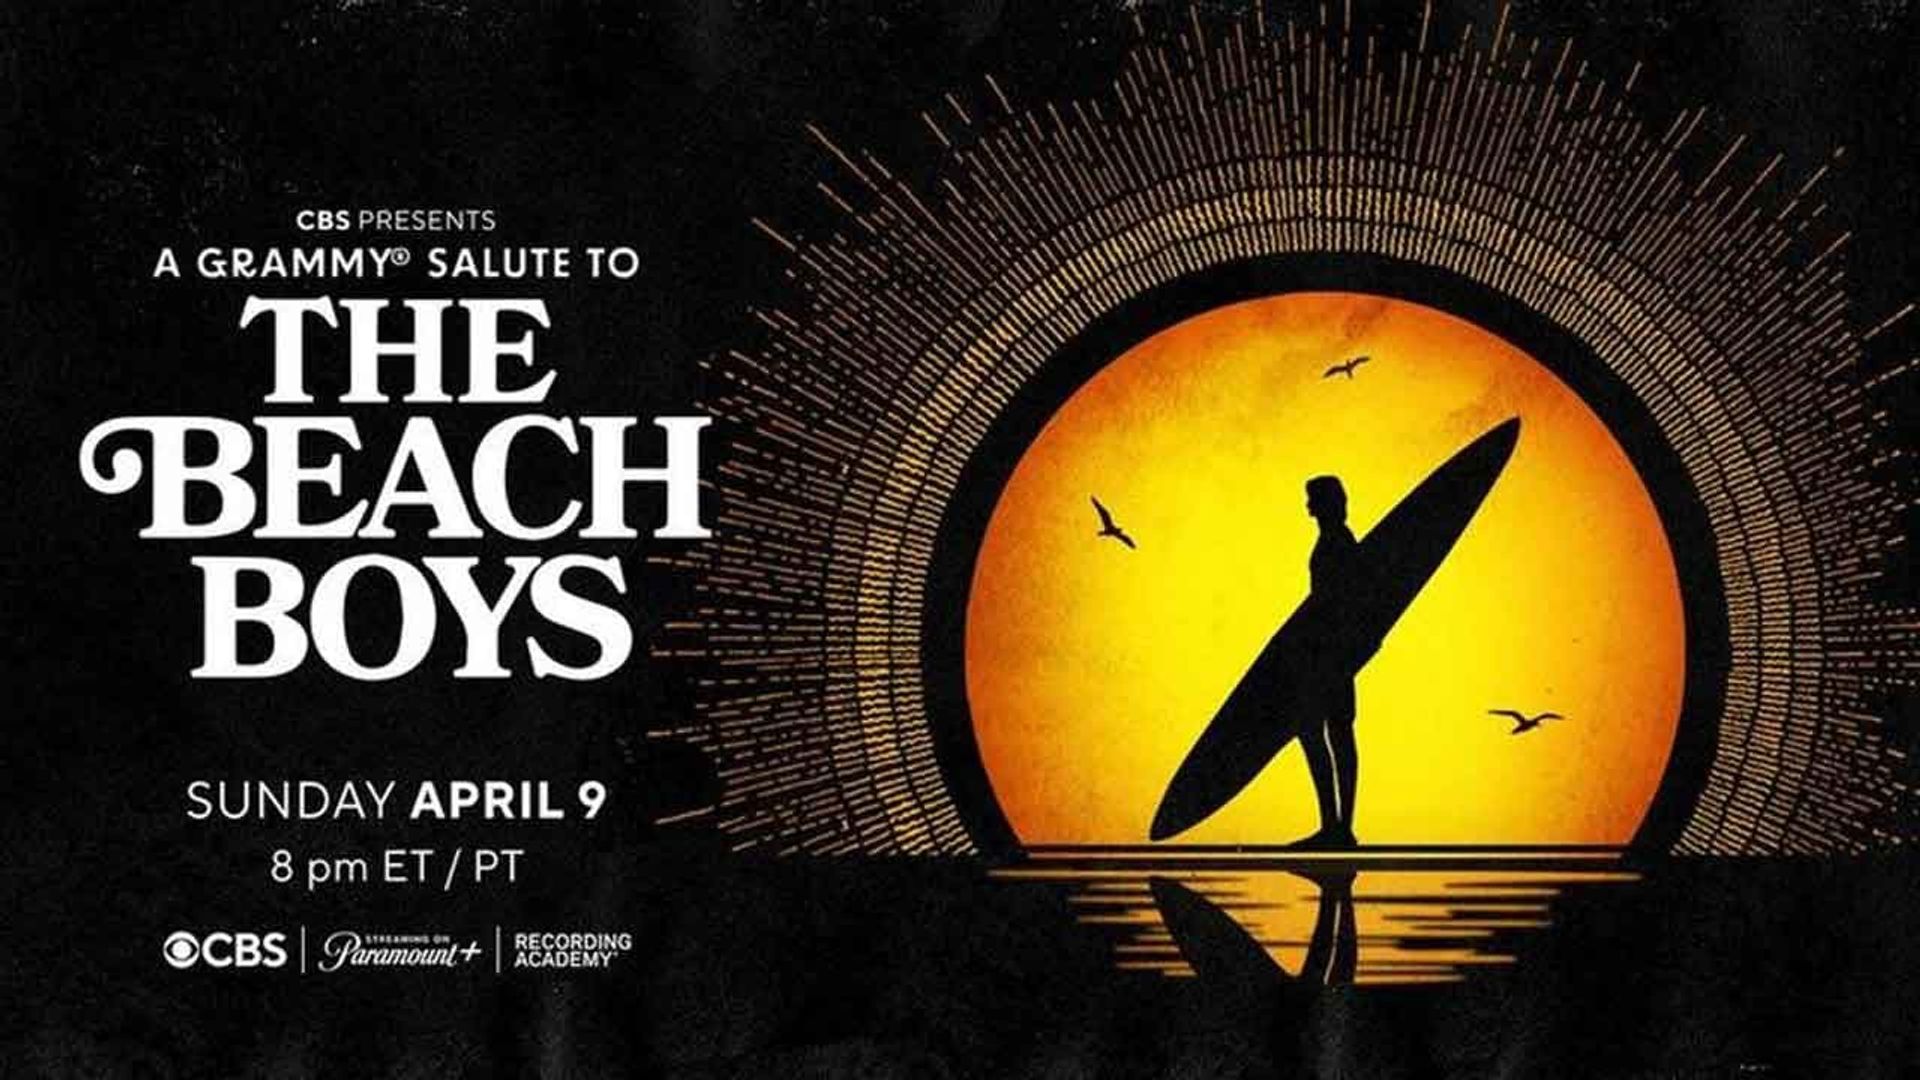 A Grammy Salute to the Beach Boys background